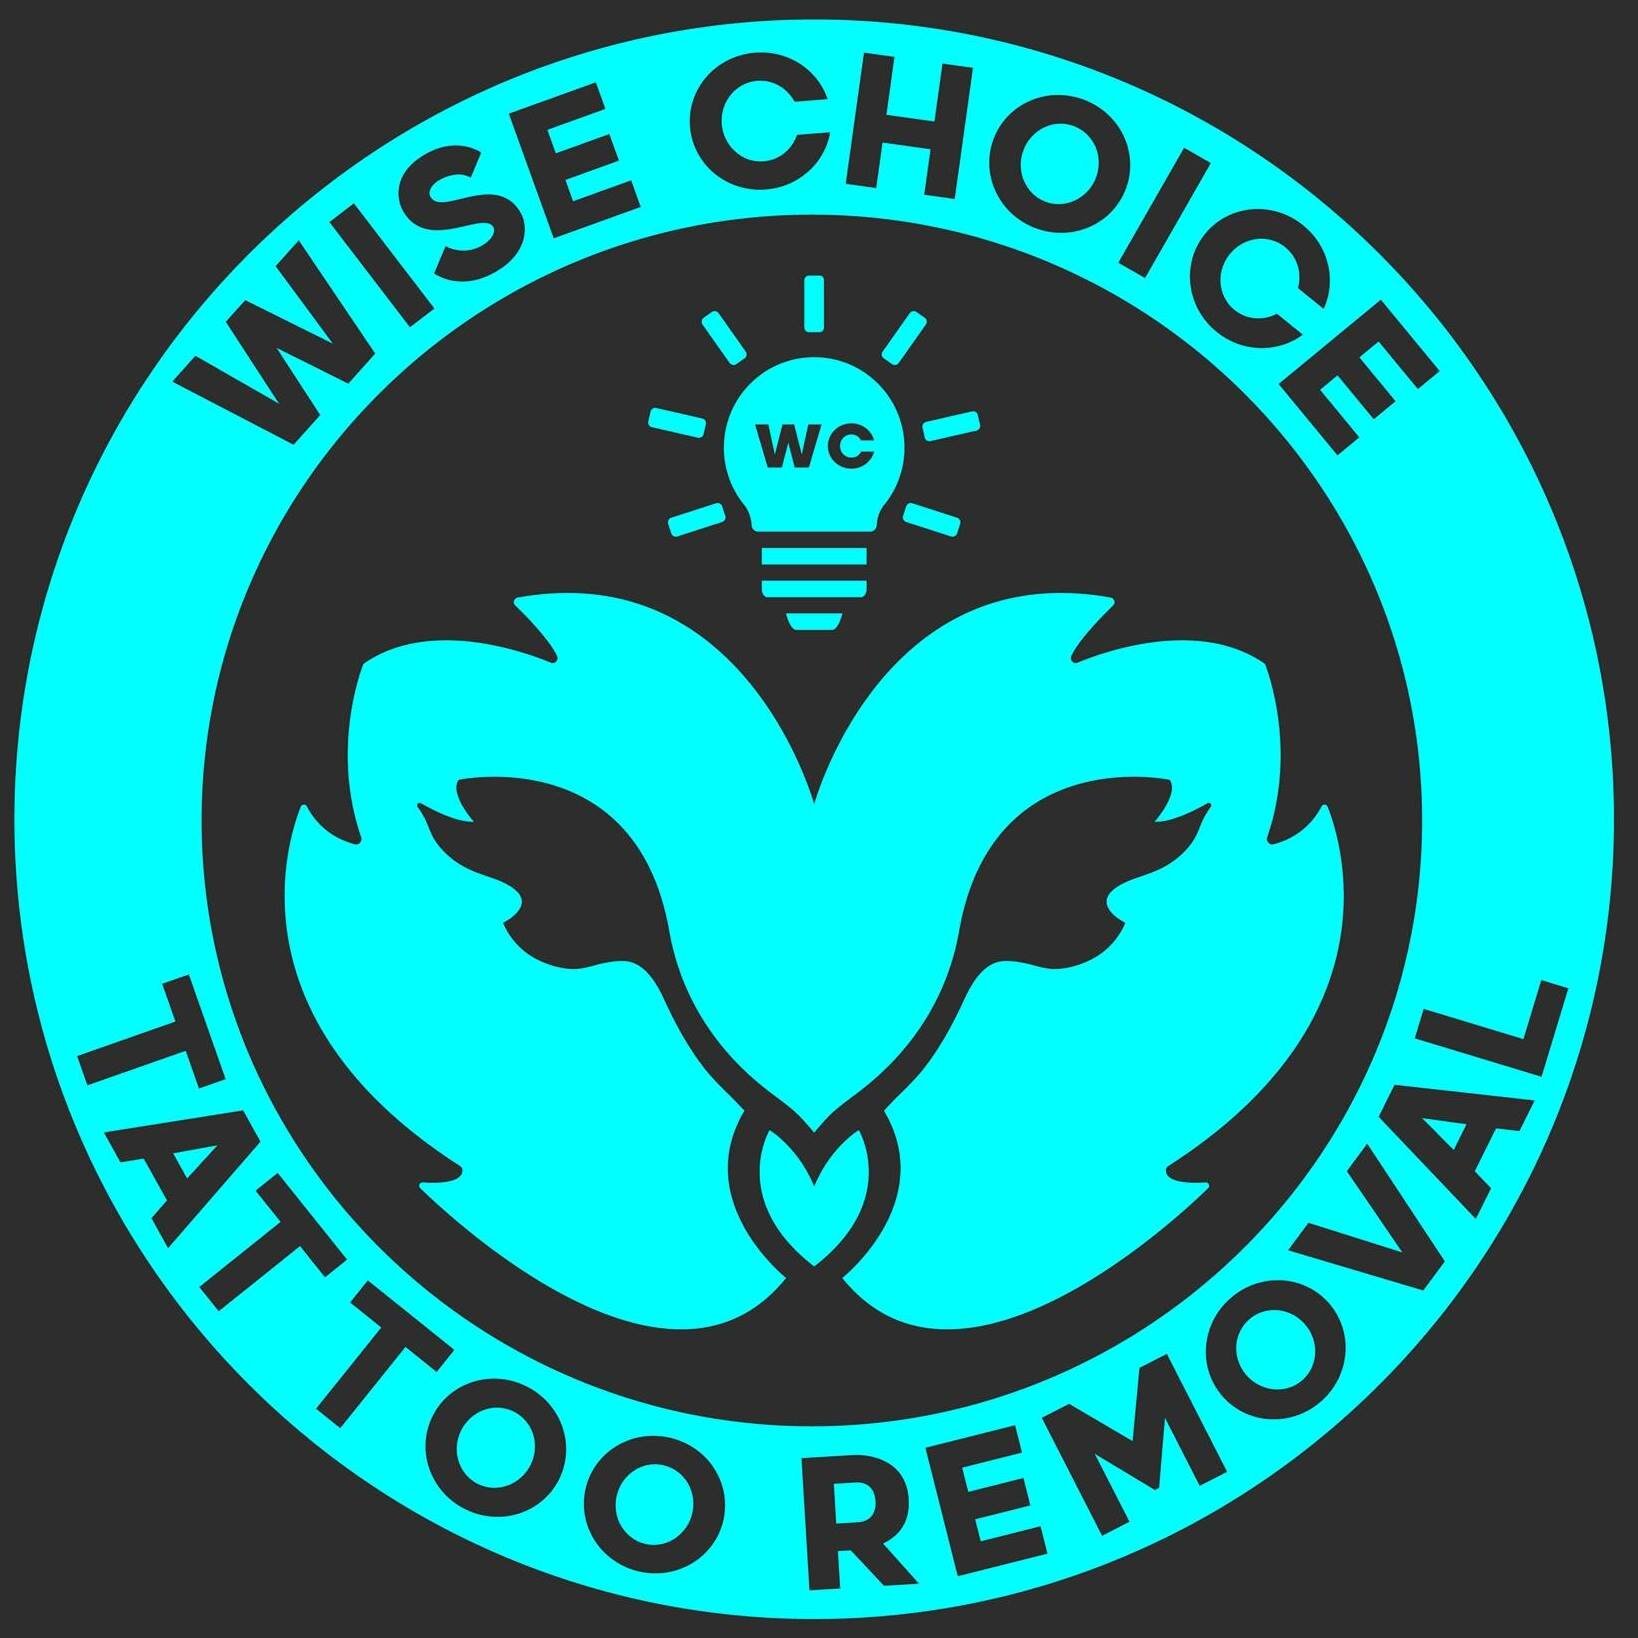 Wise Choice Tattoo Removal.jpg